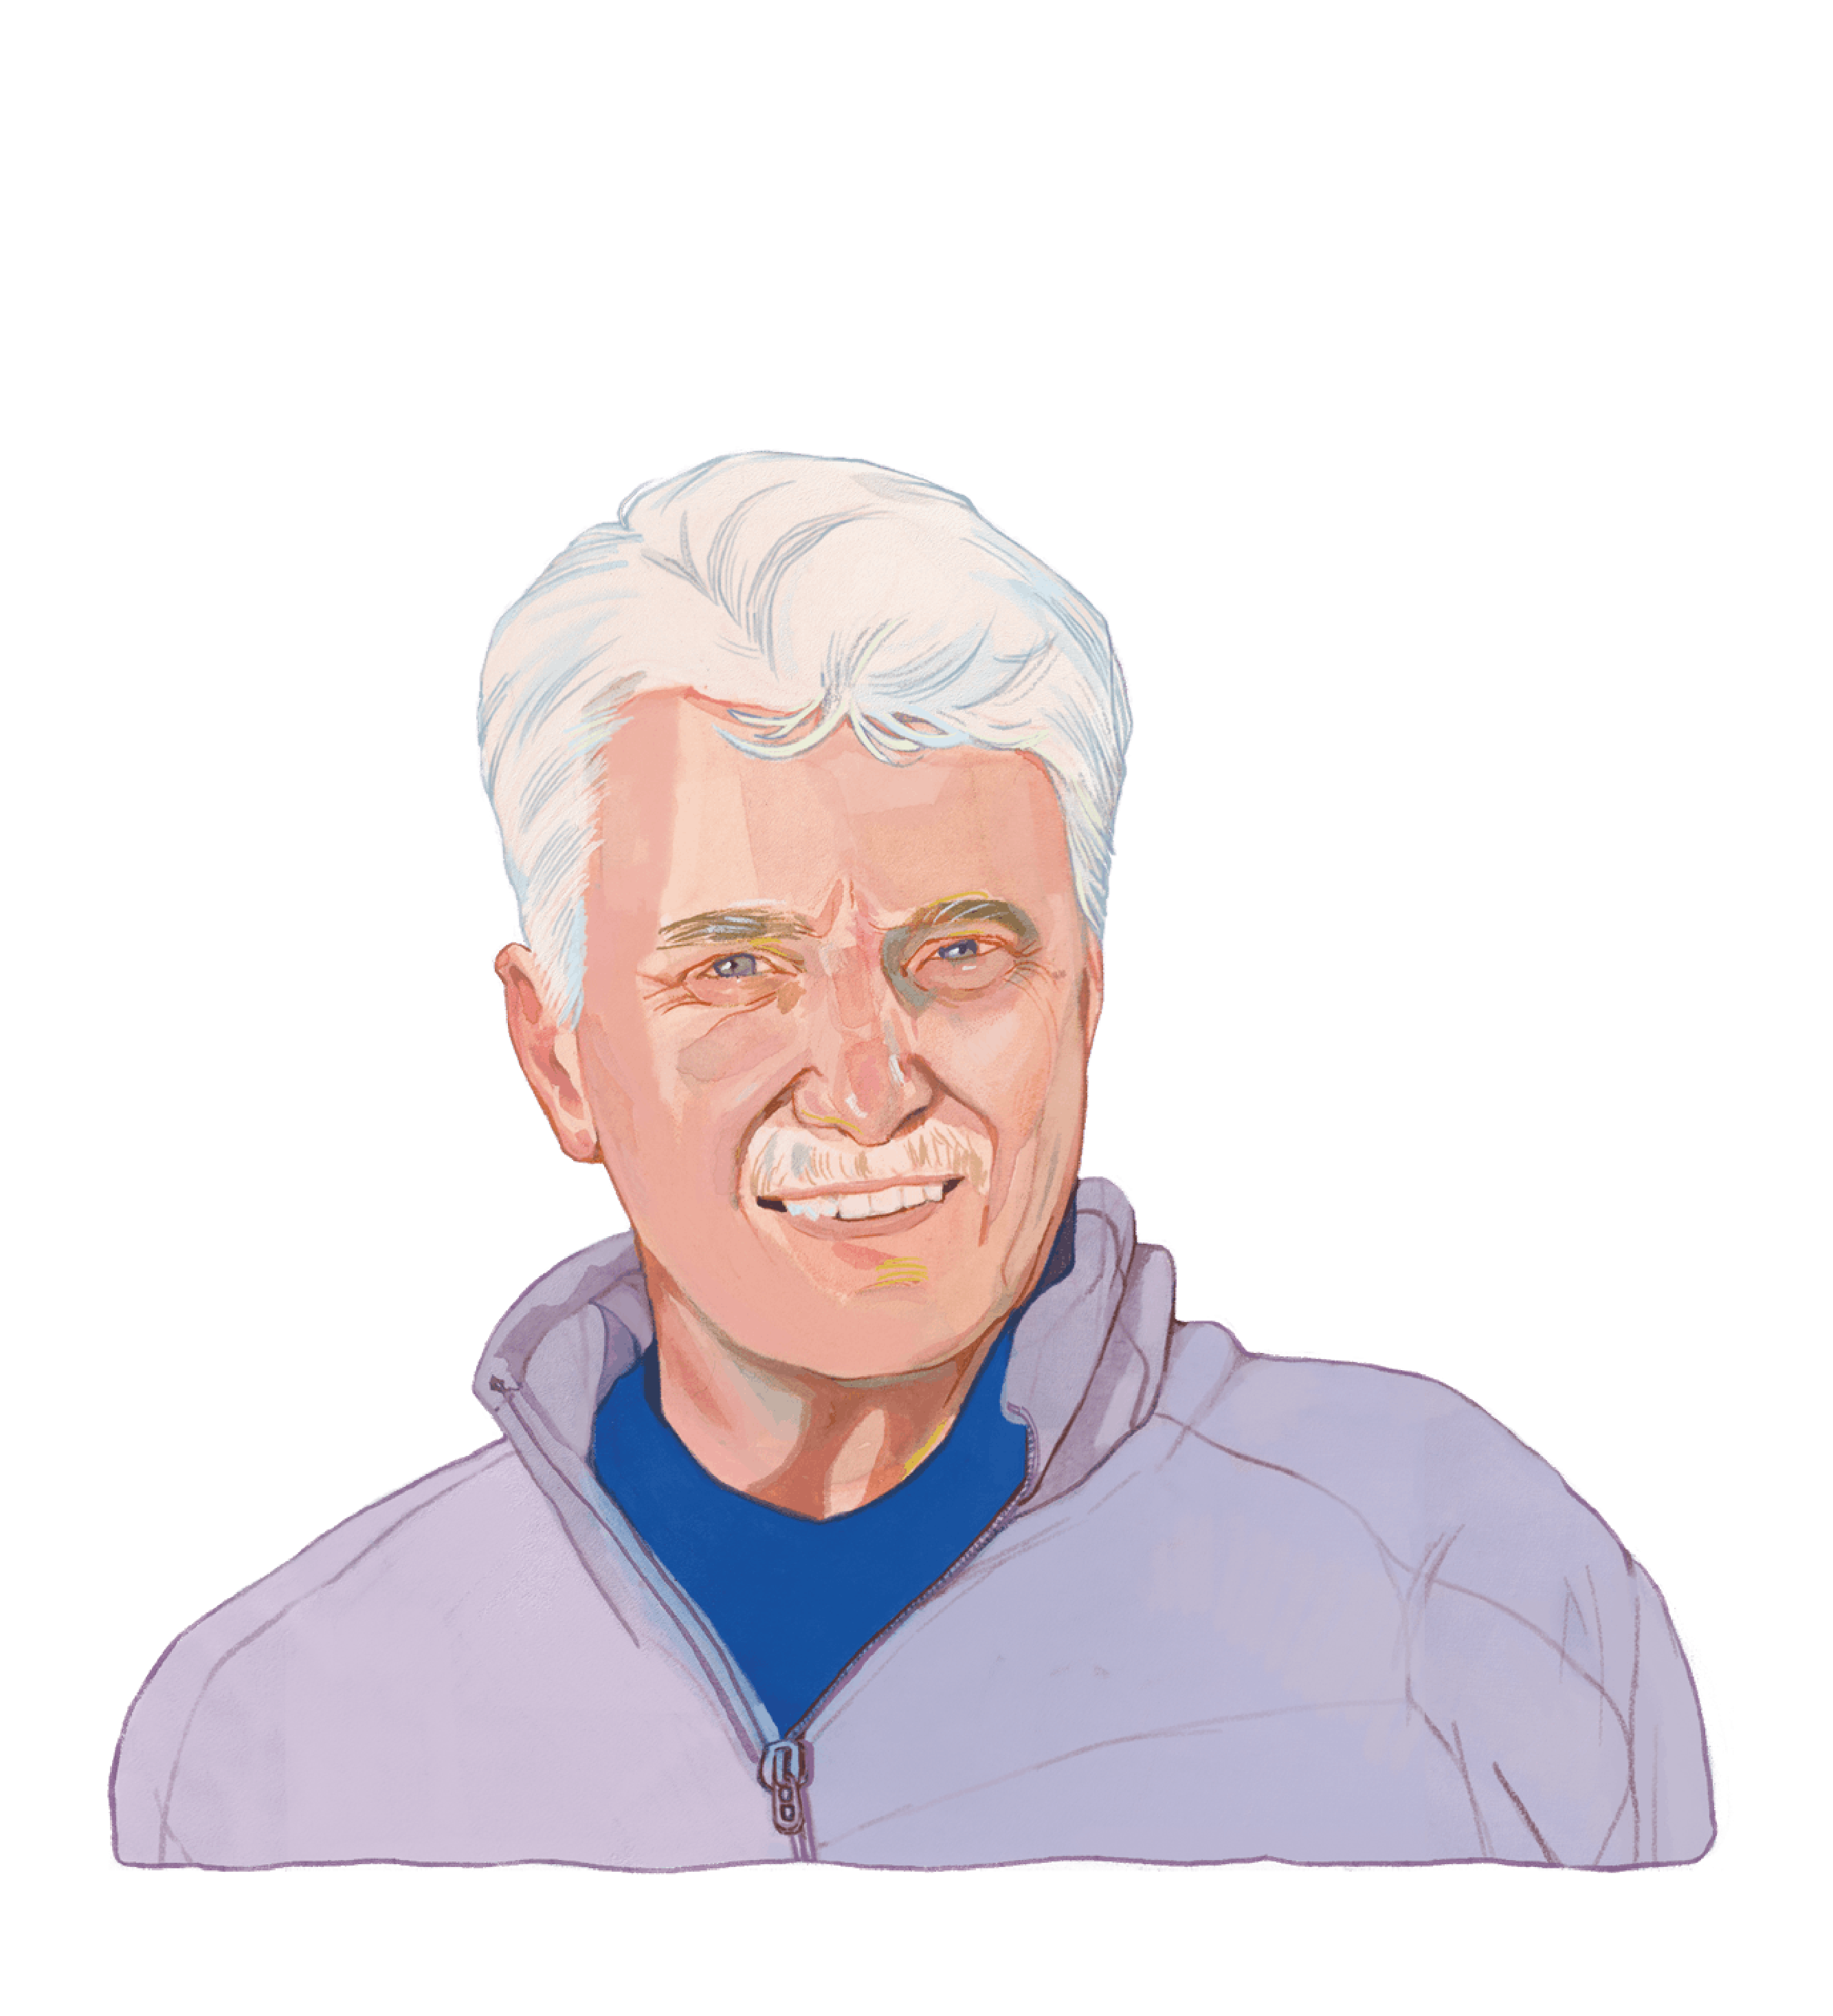 Color illustration of Philip J. Cook, a person with a light skin tone wearing a light gray zip-up jacket and blue t-shirt. They have parted white hair, a white mustache, and a pleasant expression on their face.